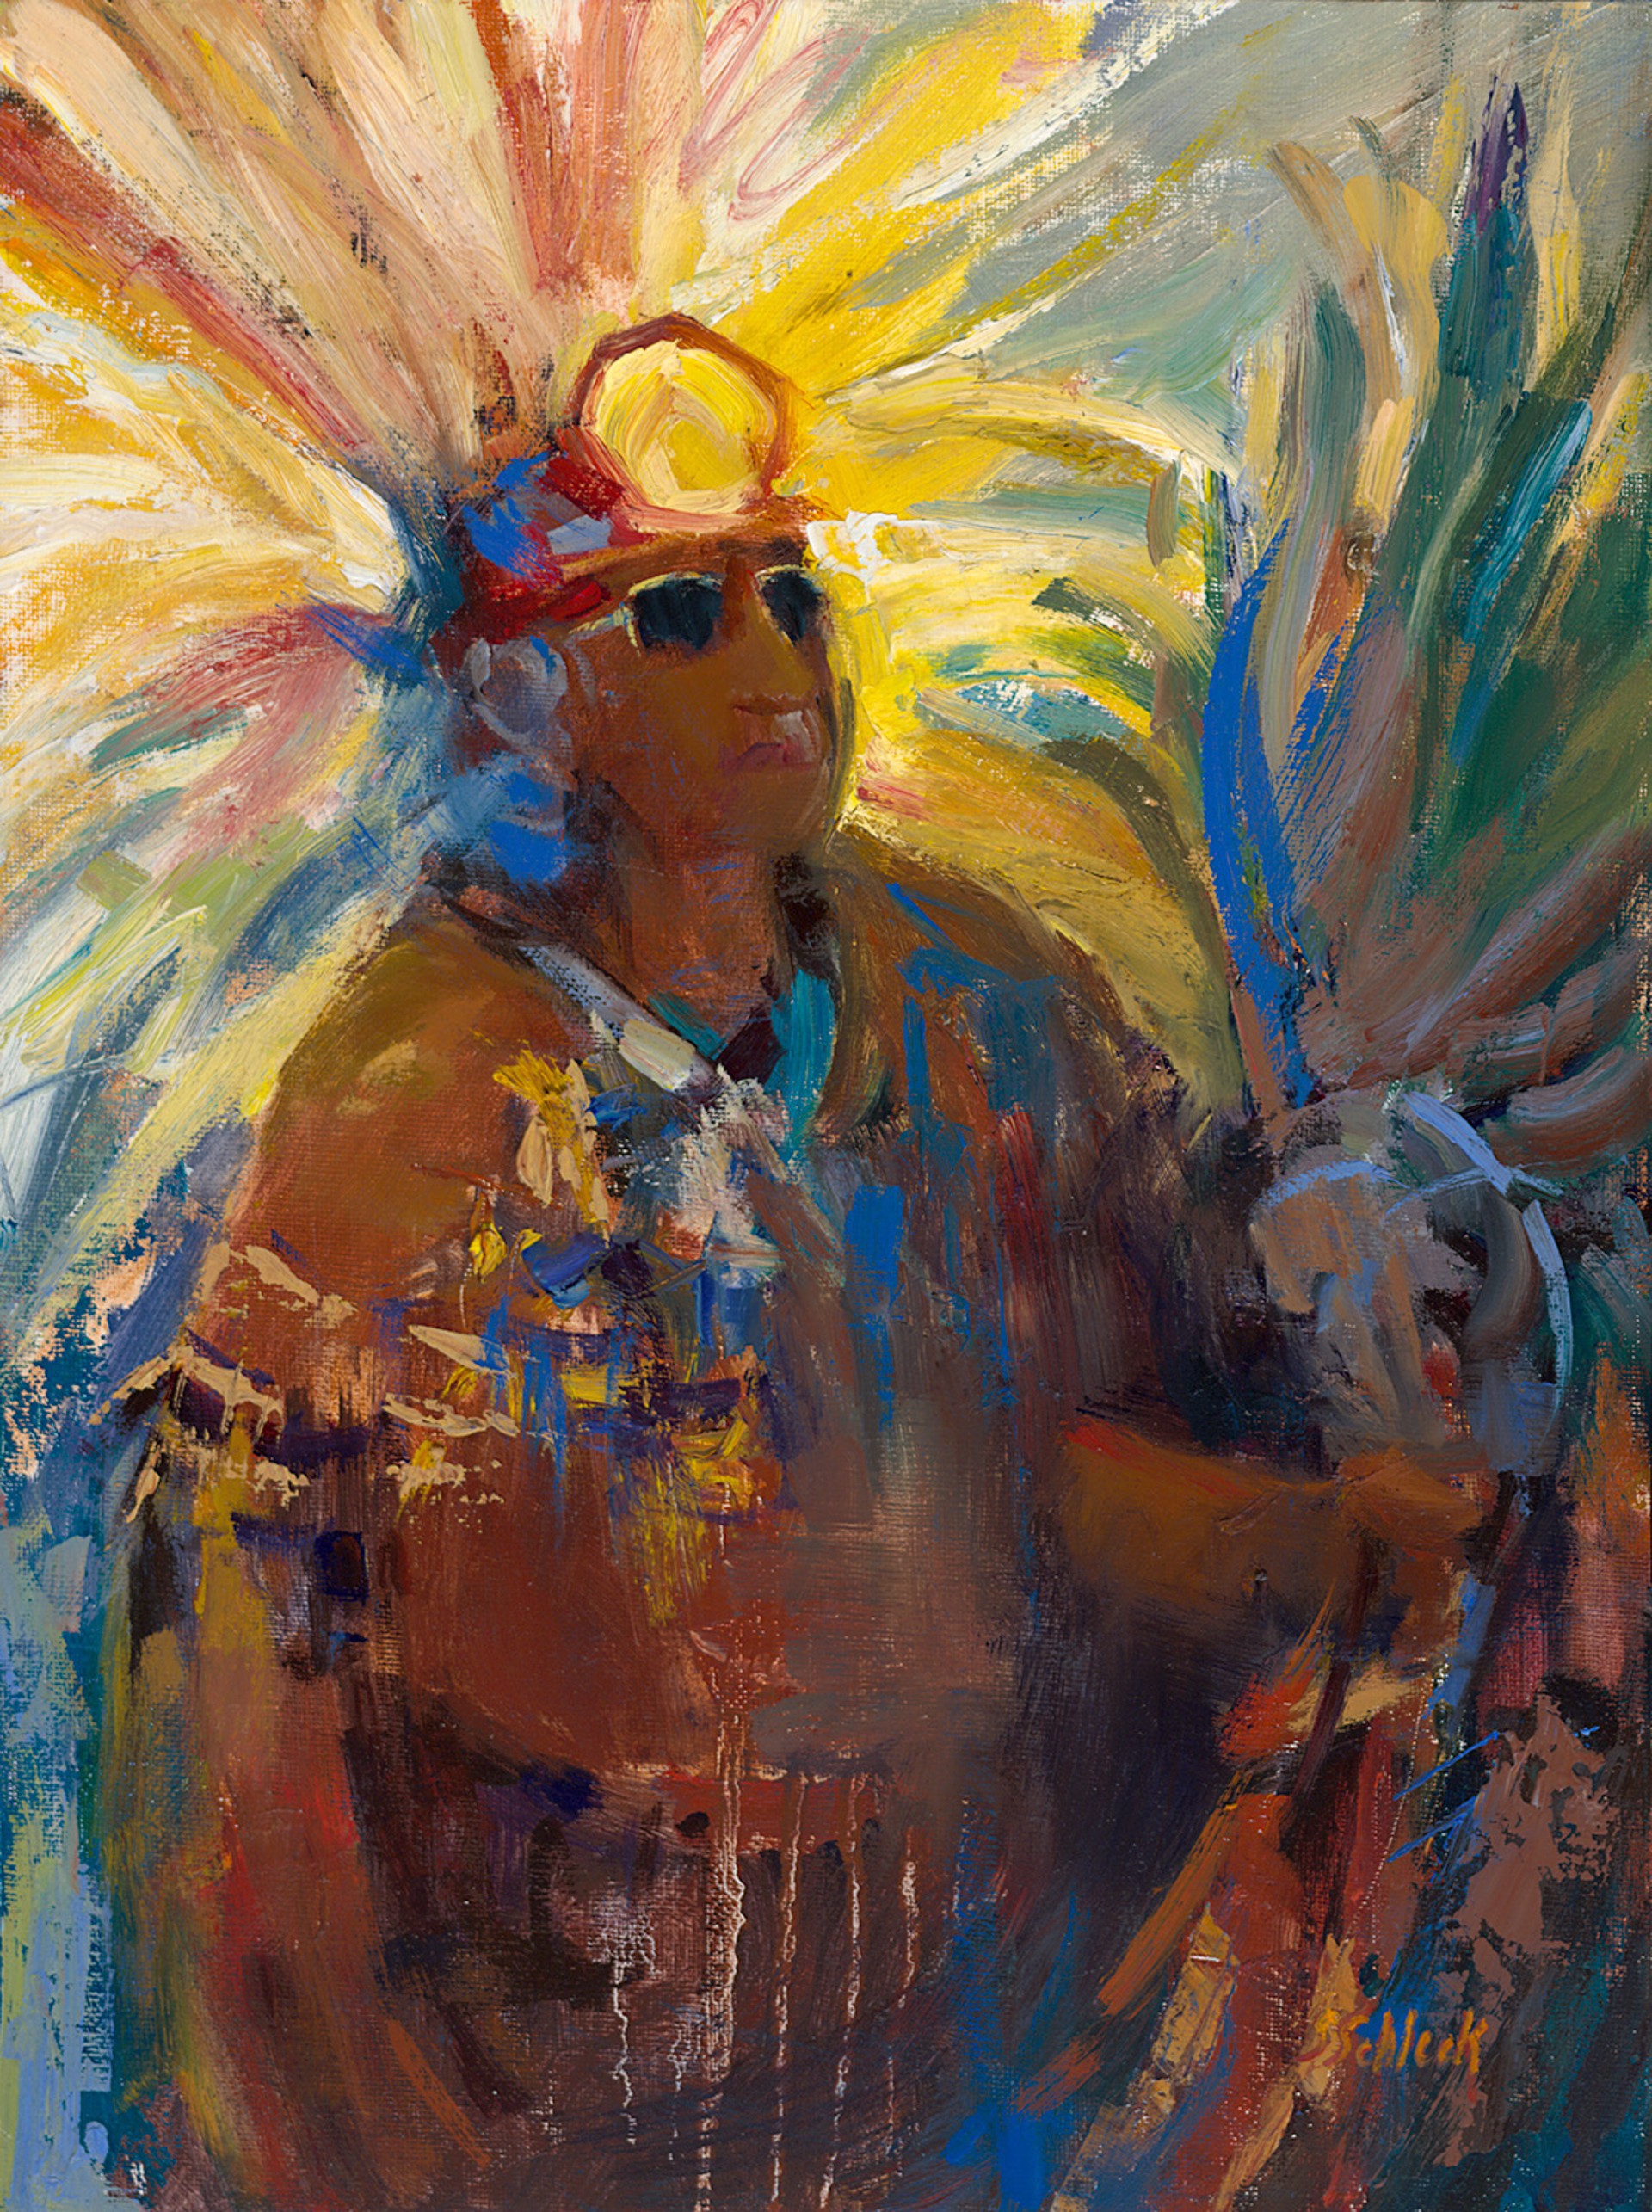 Pow Wow Glow (Indian In Sunglasses) by Suzanne Schleck